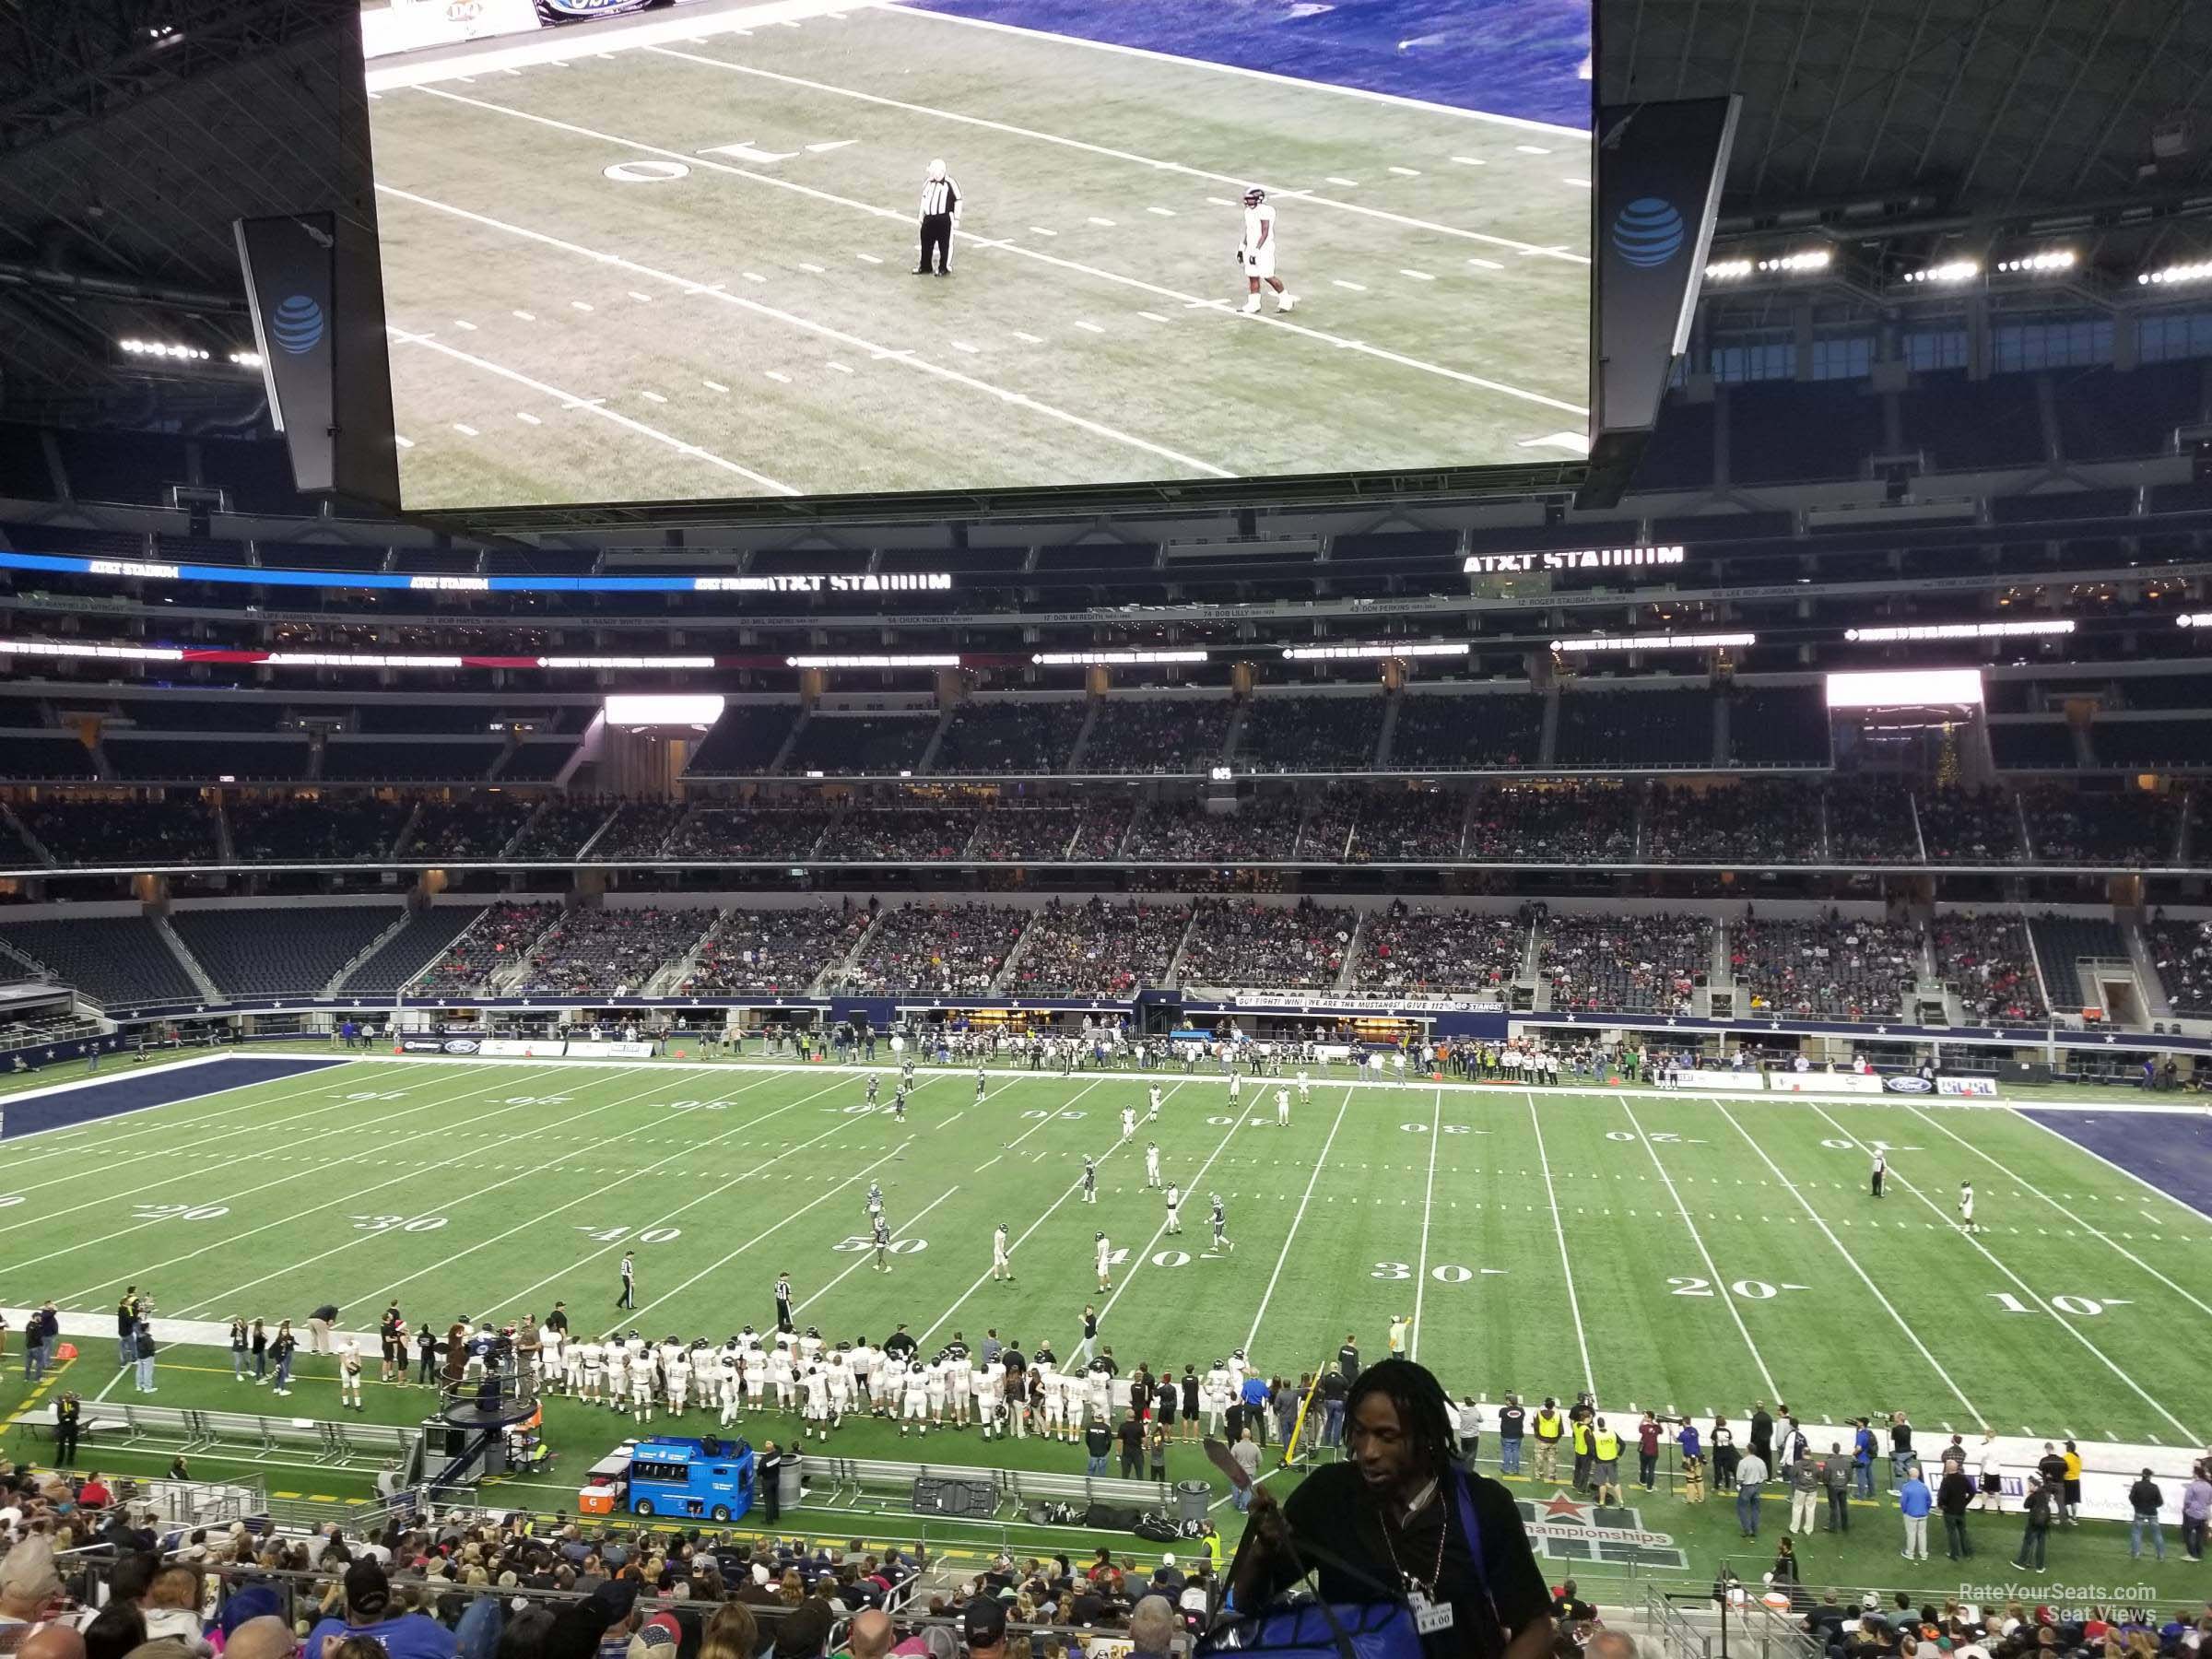 section c233, row 10 seat view  for football - at&t stadium (cowboys stadium)